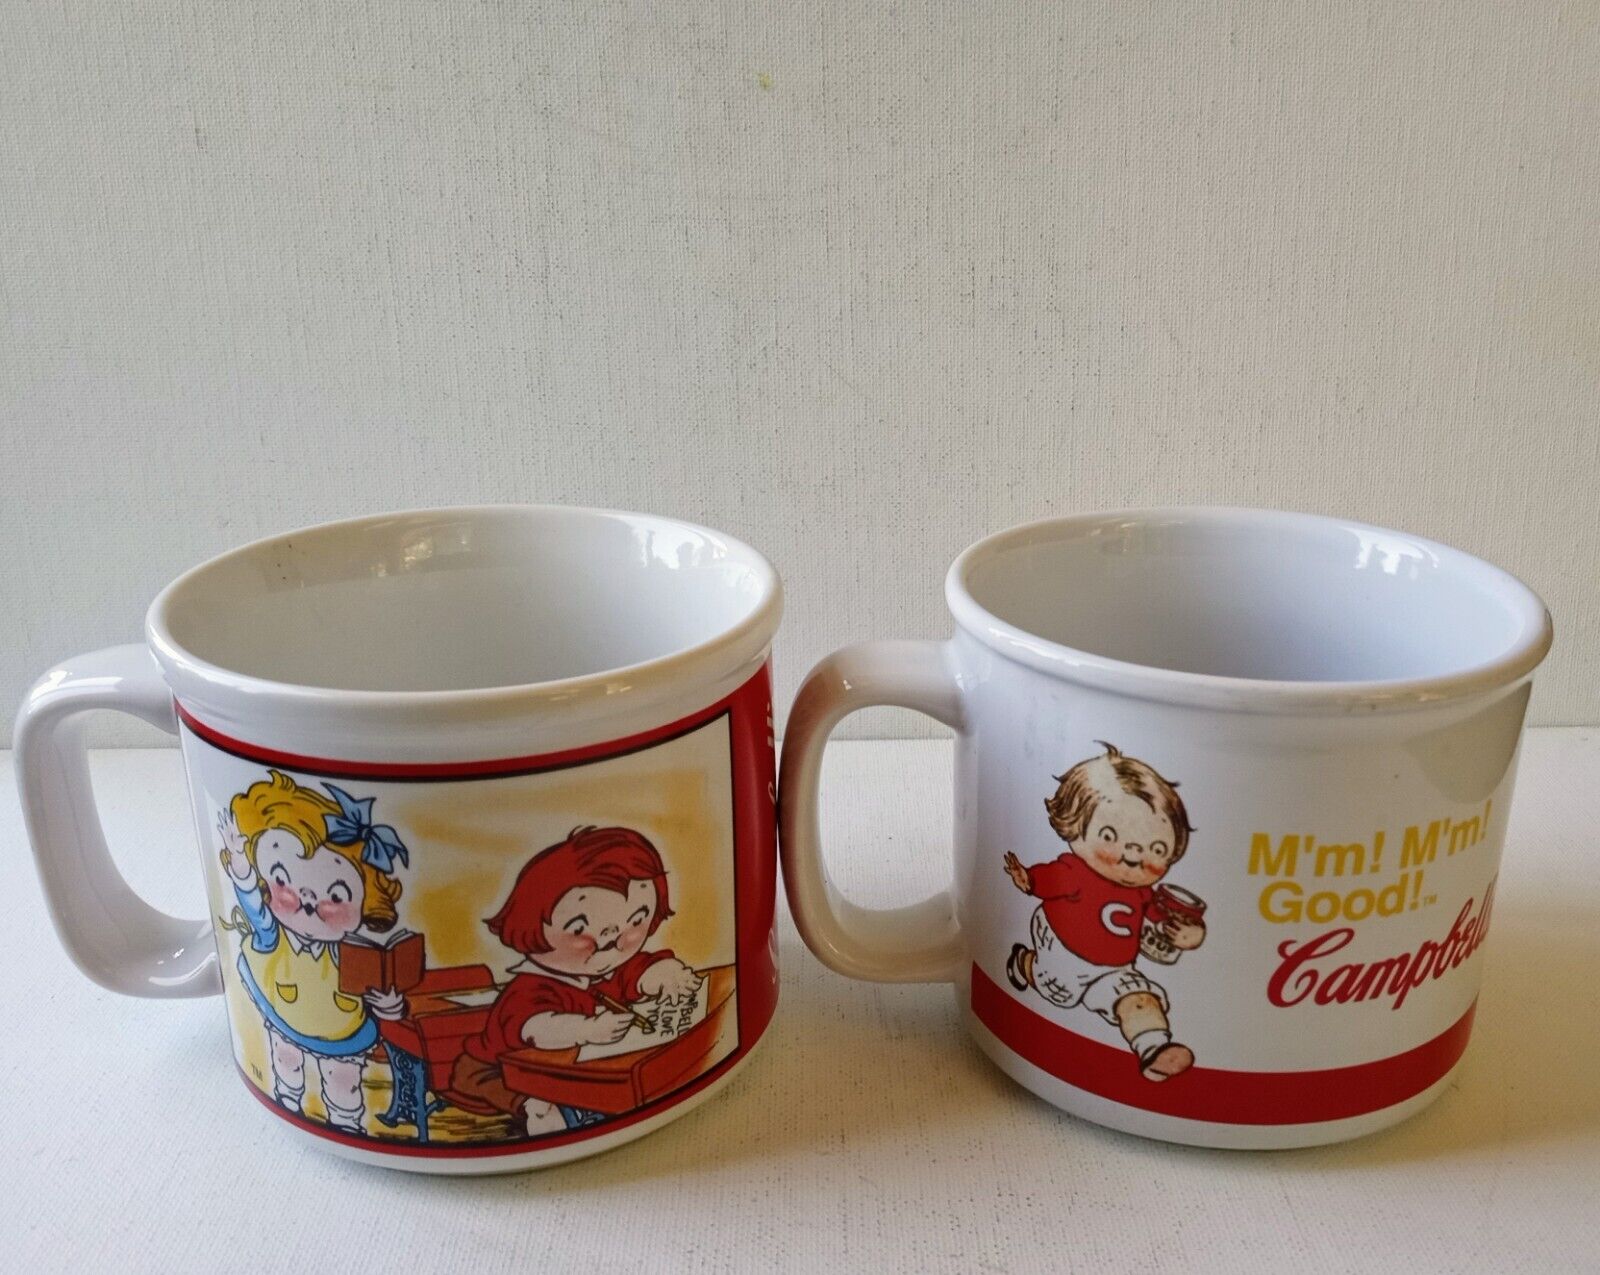 2 Campbell Soup Mugs 1998 & 2004. Licensed by Campbell Soup. Great for gift.